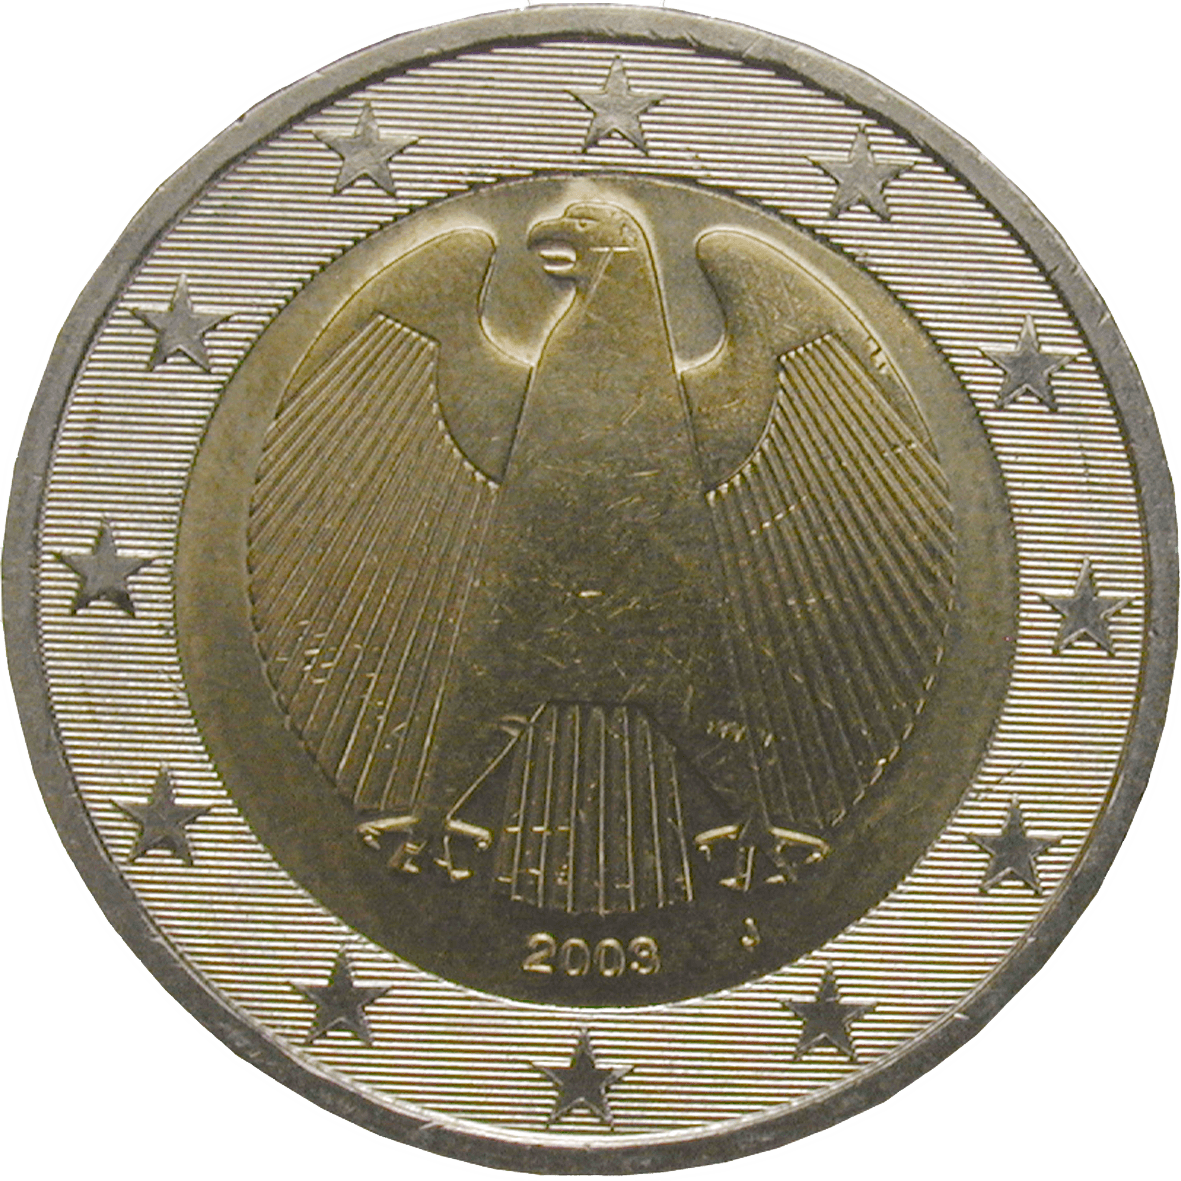 Federal Republic of Germany, 2 Euro 2003 (reverse)